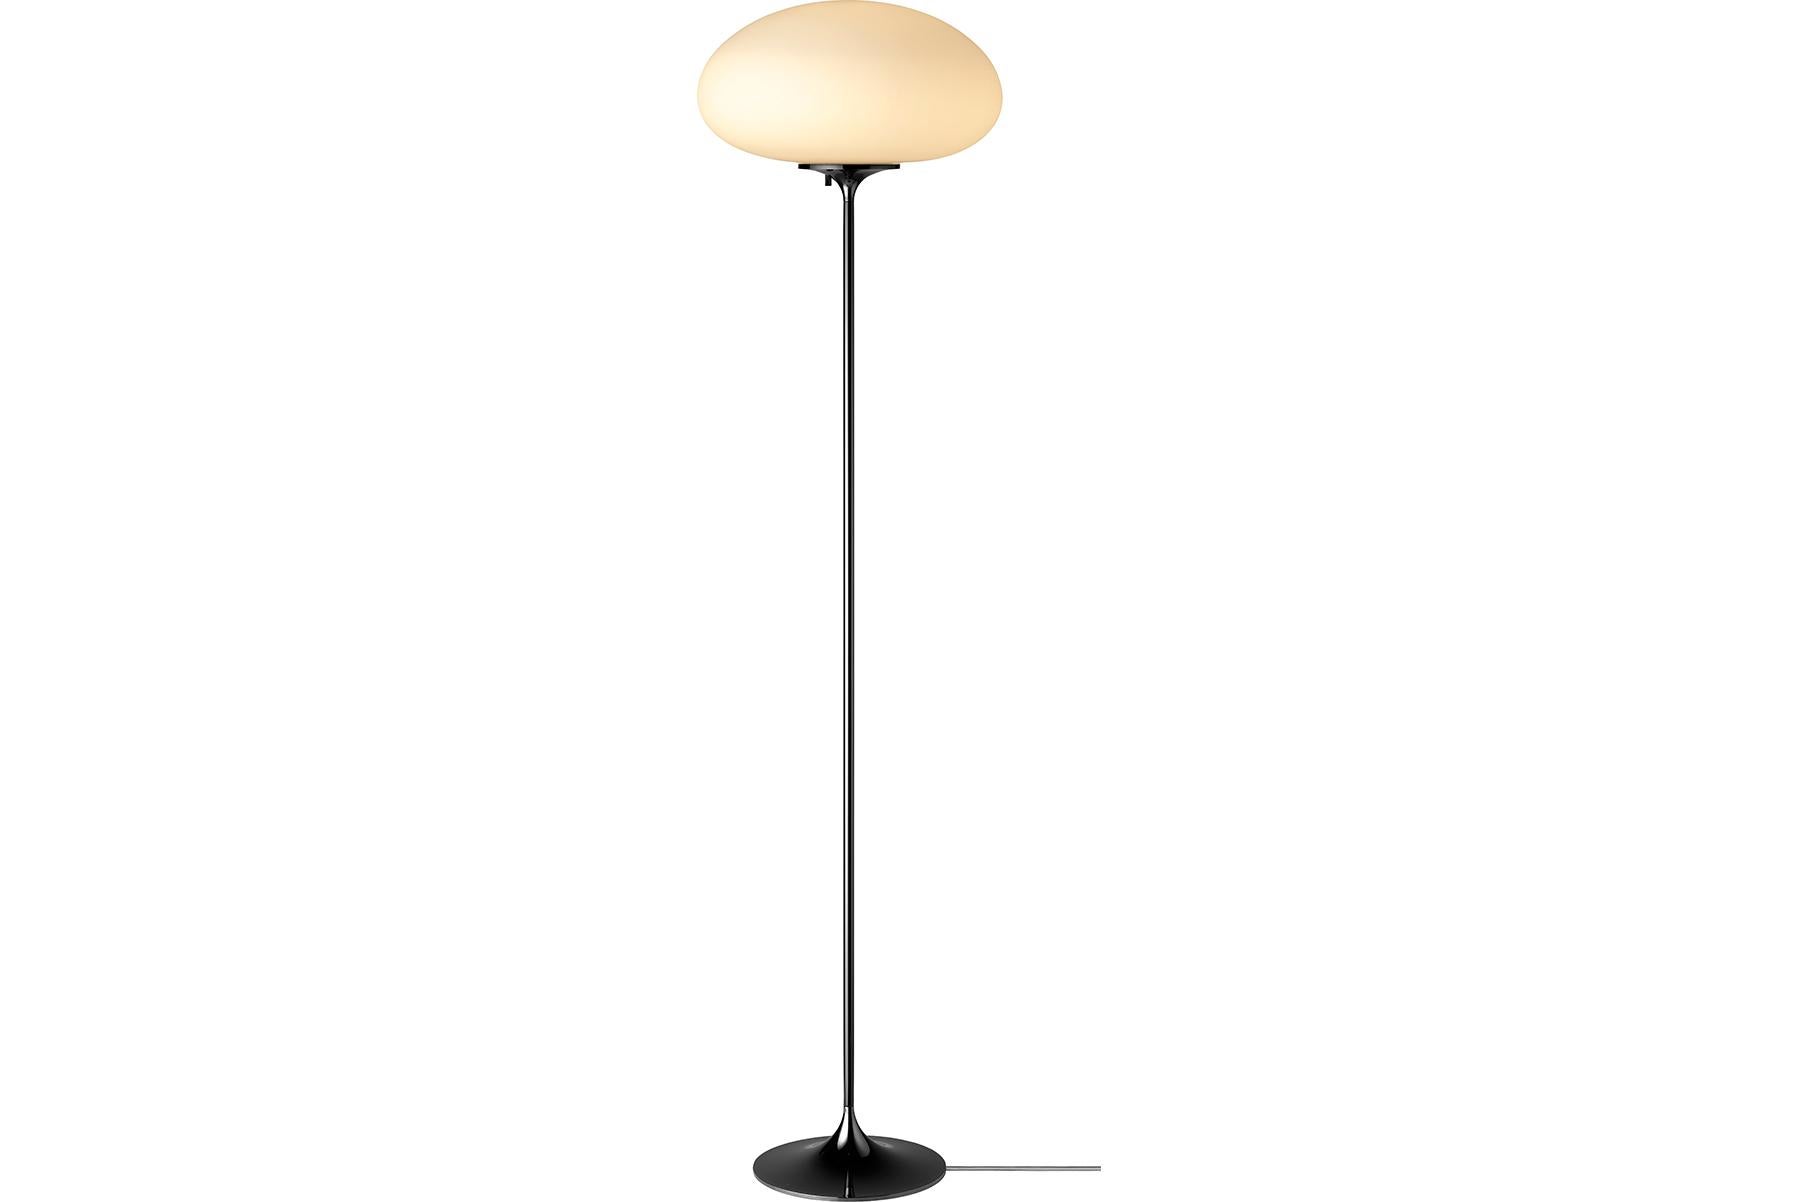 The Stemlite (1962) was the first ‘total look’ lamp, a pioneering new typology conceived by American Designer Bill Curry, which replaced the traditional base-plus-shade form with a single self-contained unit comprising interchangeable modules. His